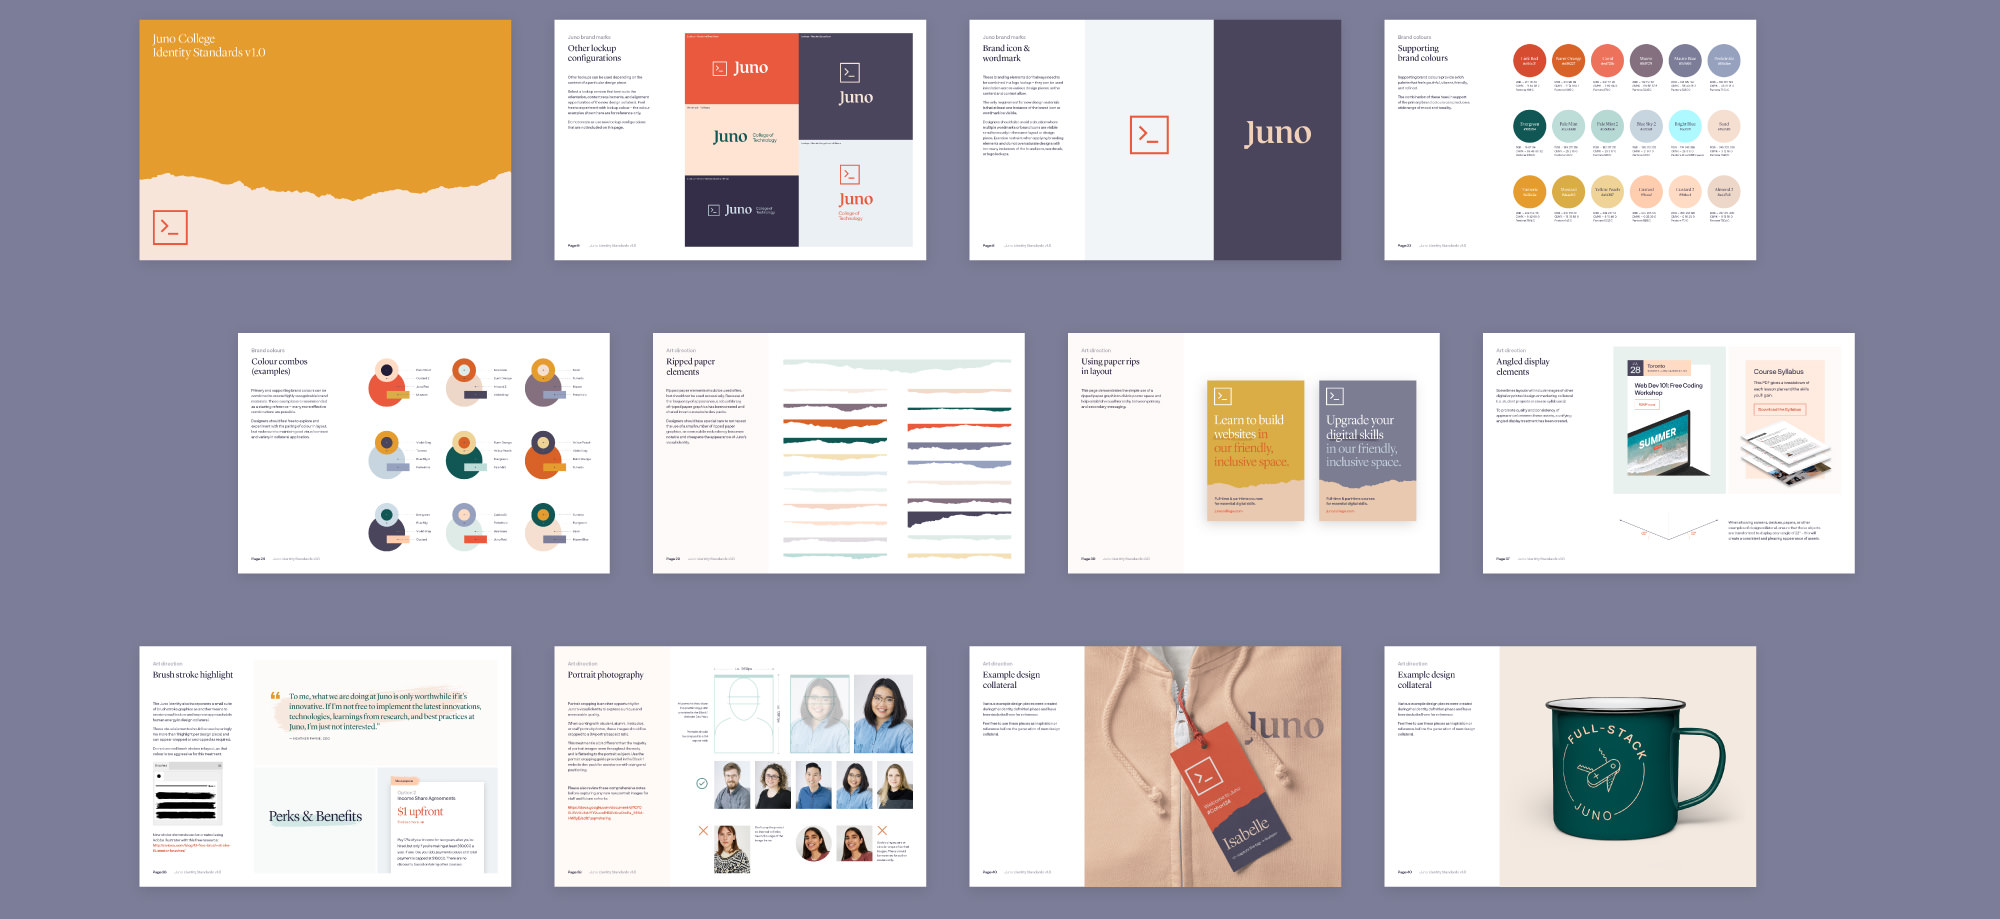 Pages from the brand standards guide for Juno featuring logo design, brand colours, typography, and general art direction overview